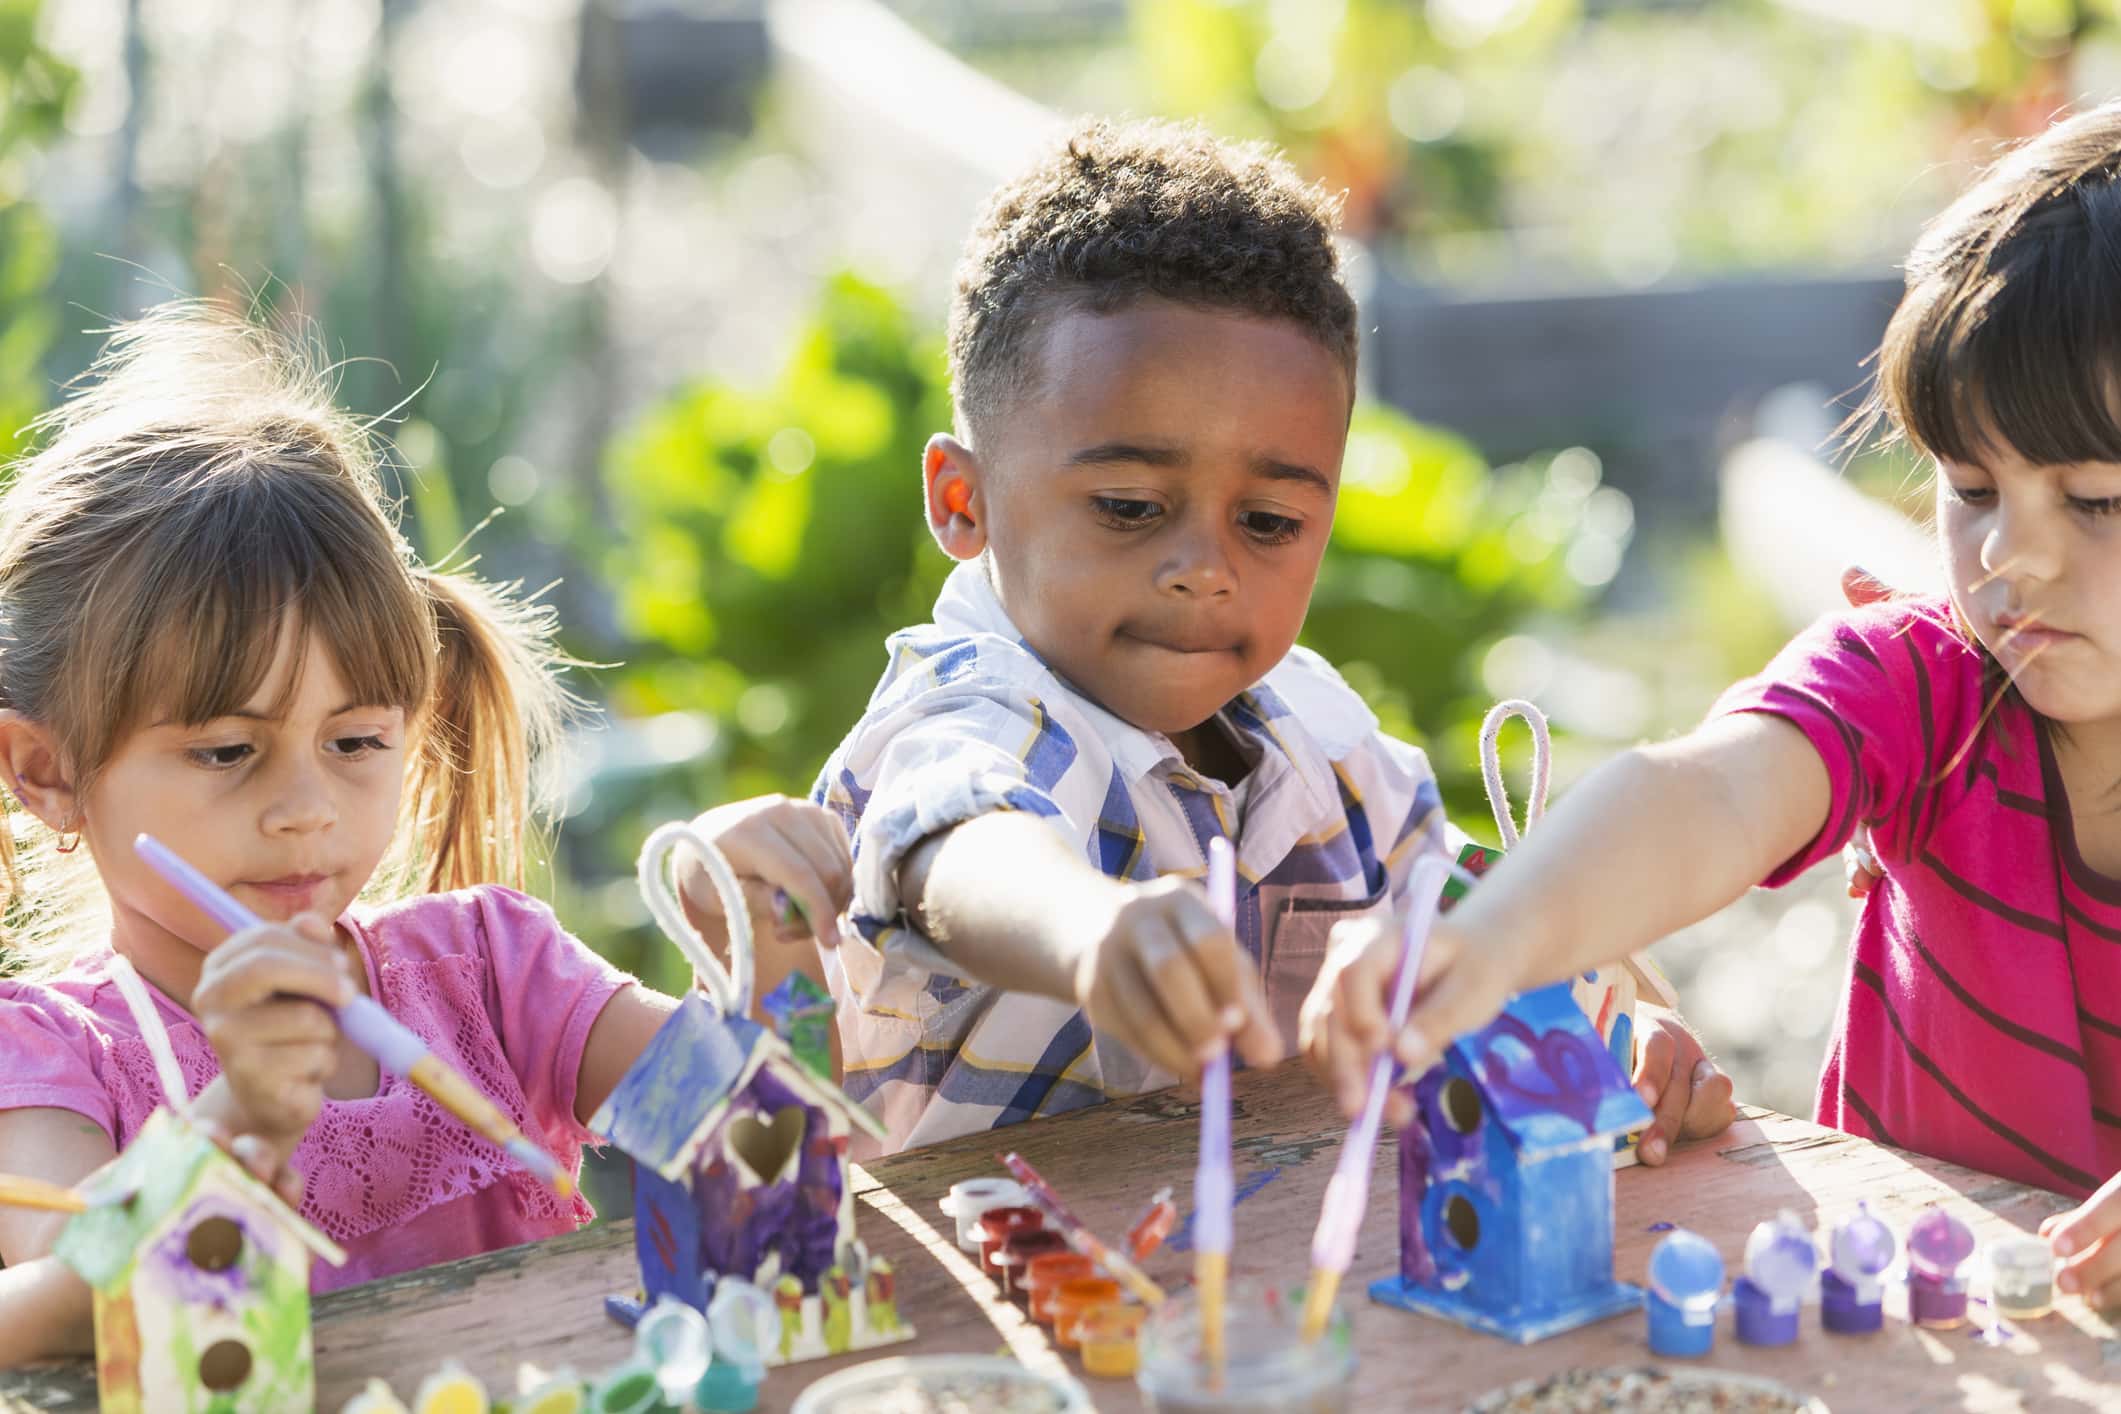 A multiracial group of three serious young children doing an arts and crafts project, painting little wooden bird houses for Earth Day. It is a bright, sunny day and they are sitting at a wooden table reaching with their paintbrushes.